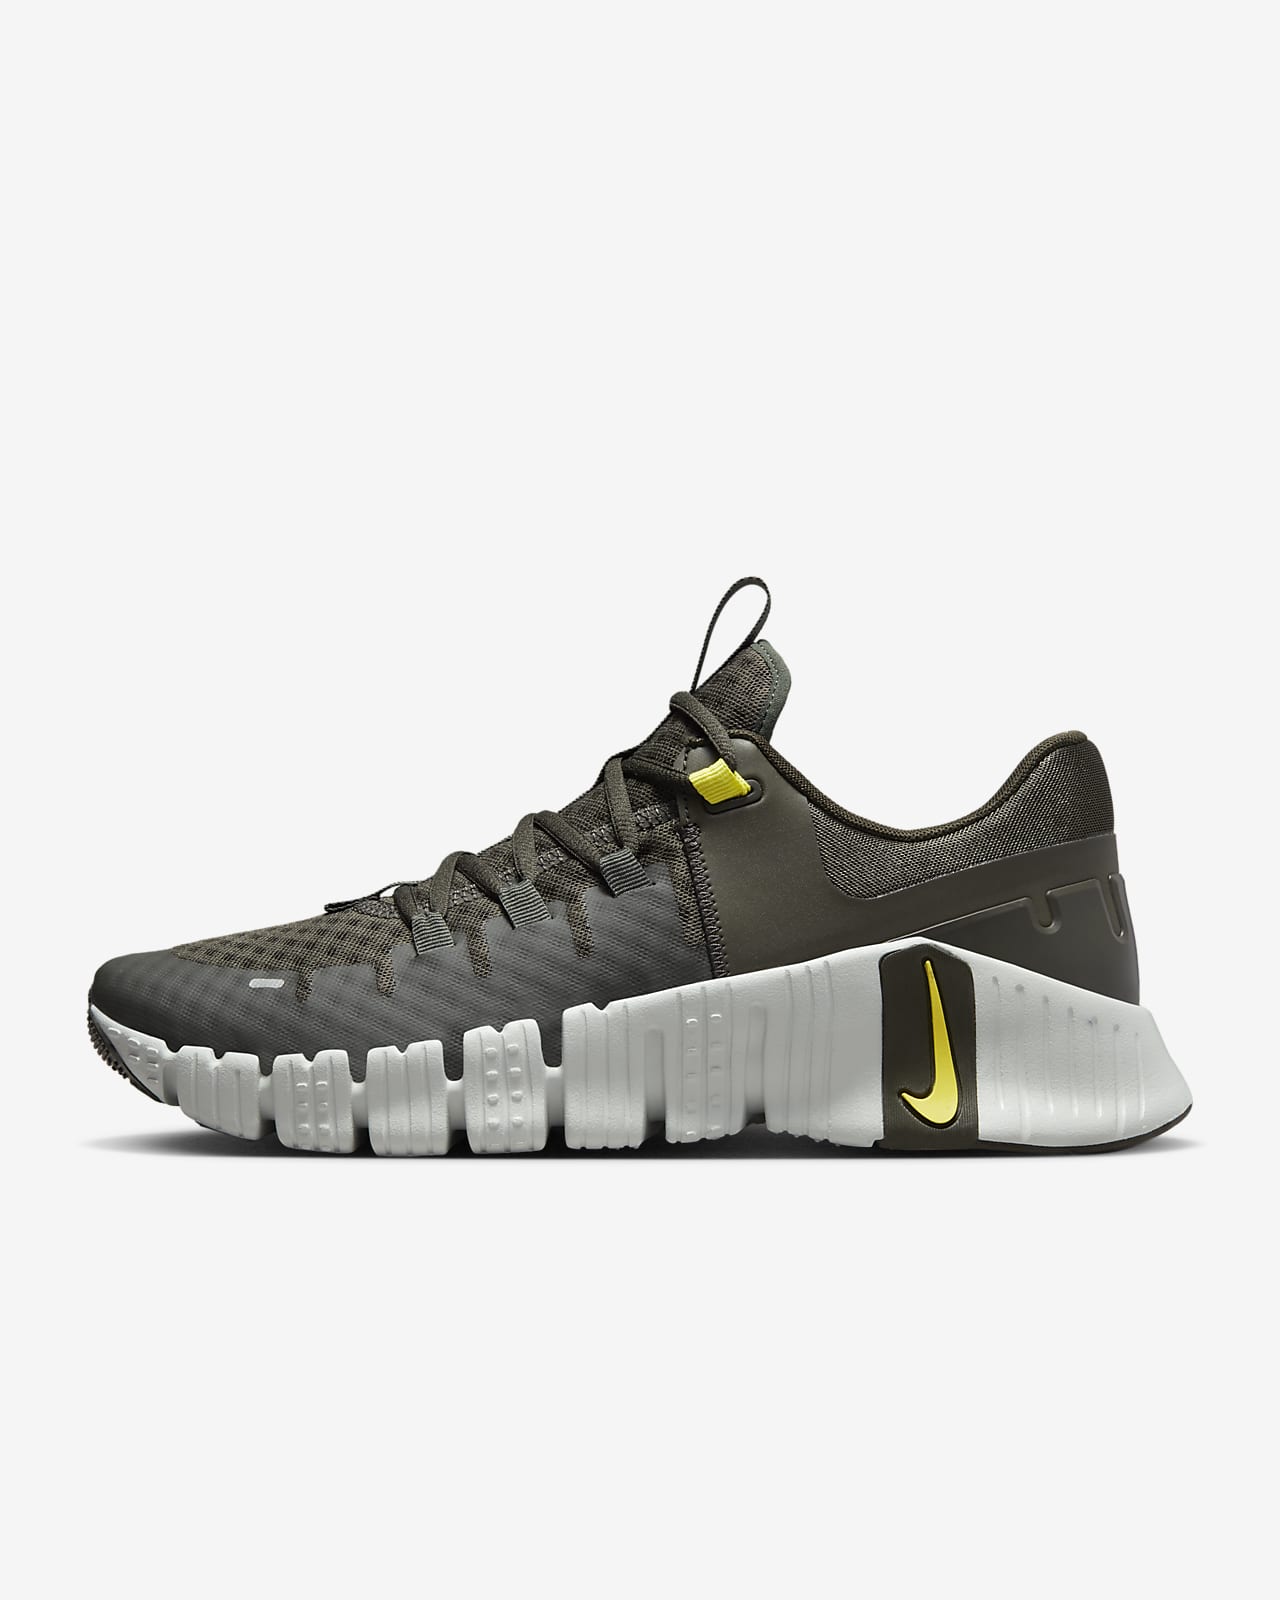 Nike Free Metcon 5 Mens Workout Shoes Review